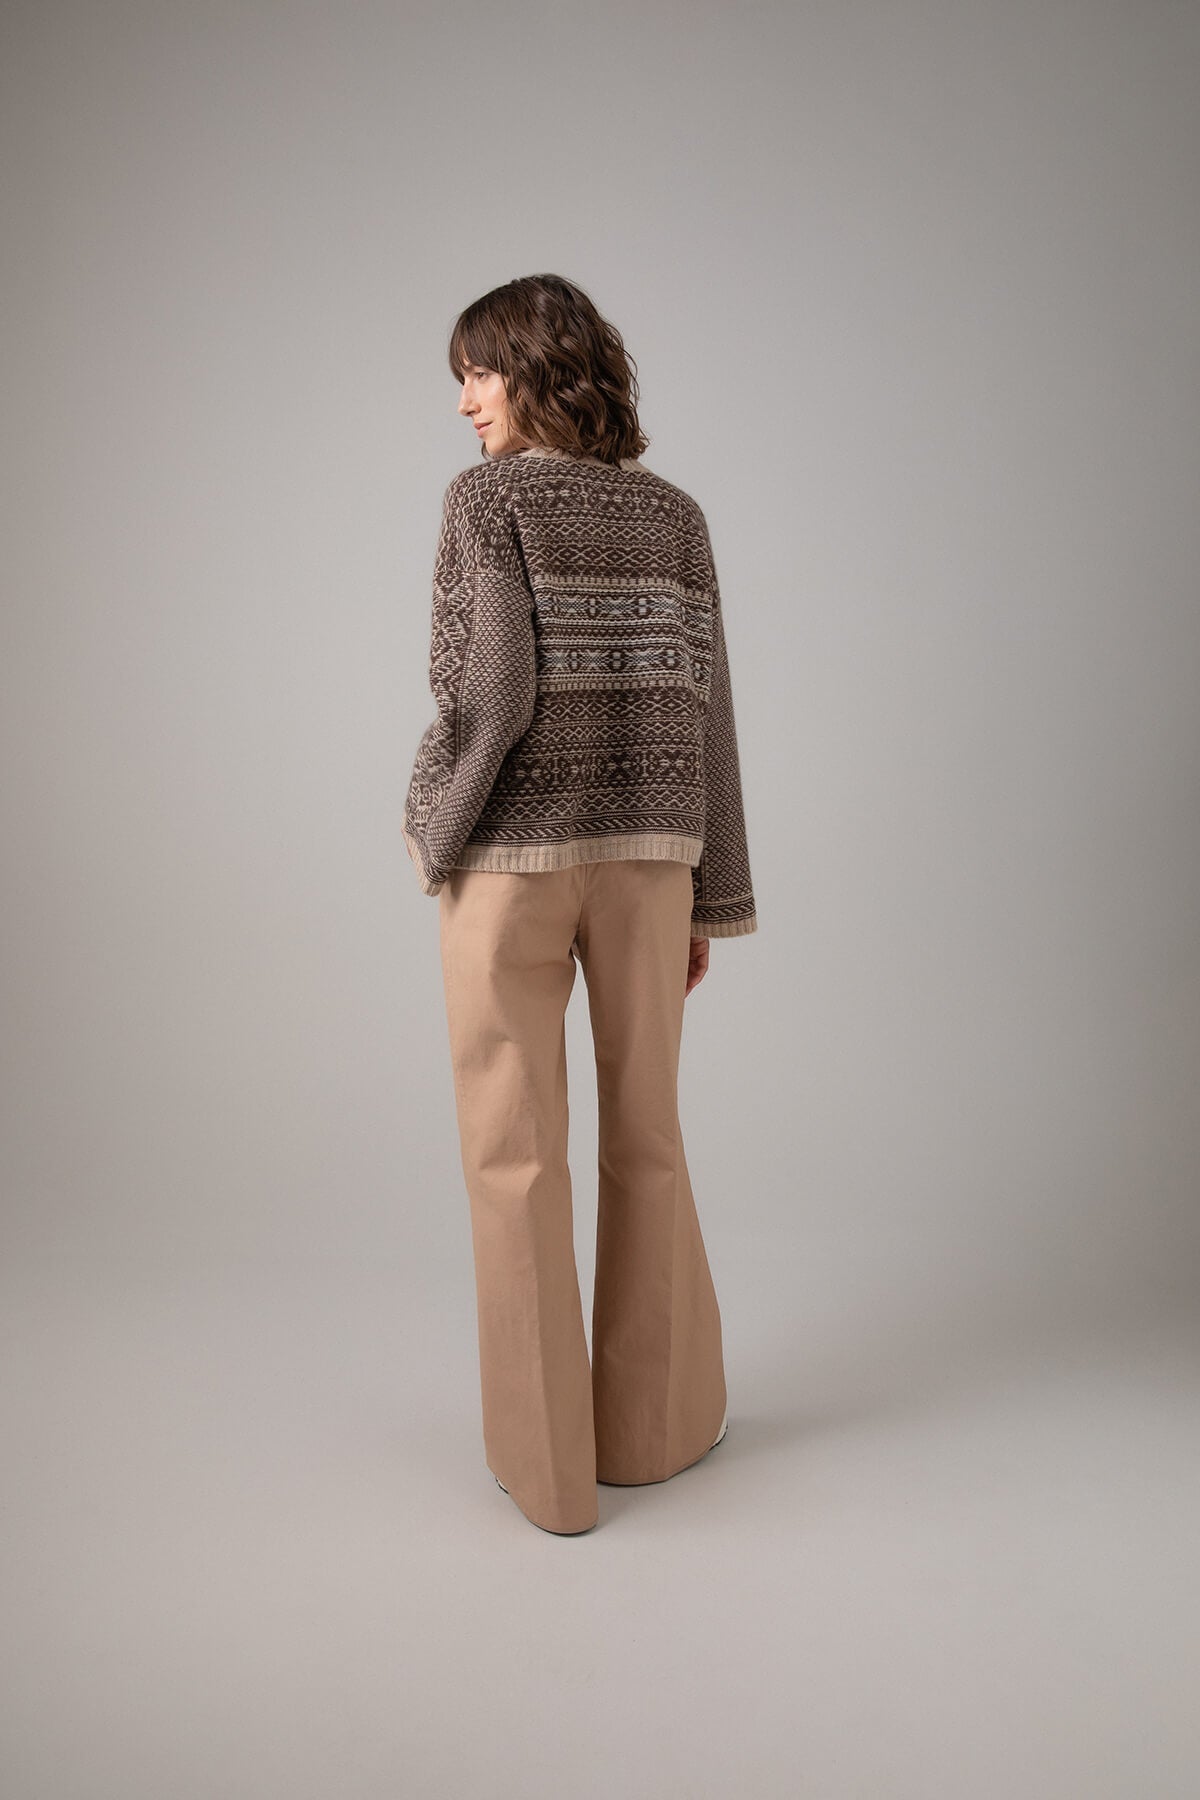 Back of Johnstons of Elgin Women's Round Neck Traditional Sanquhar Fairisle Cashmere Sweater in Oatmeal worn with Camel Trousers on a grey background KAC05099Q23724